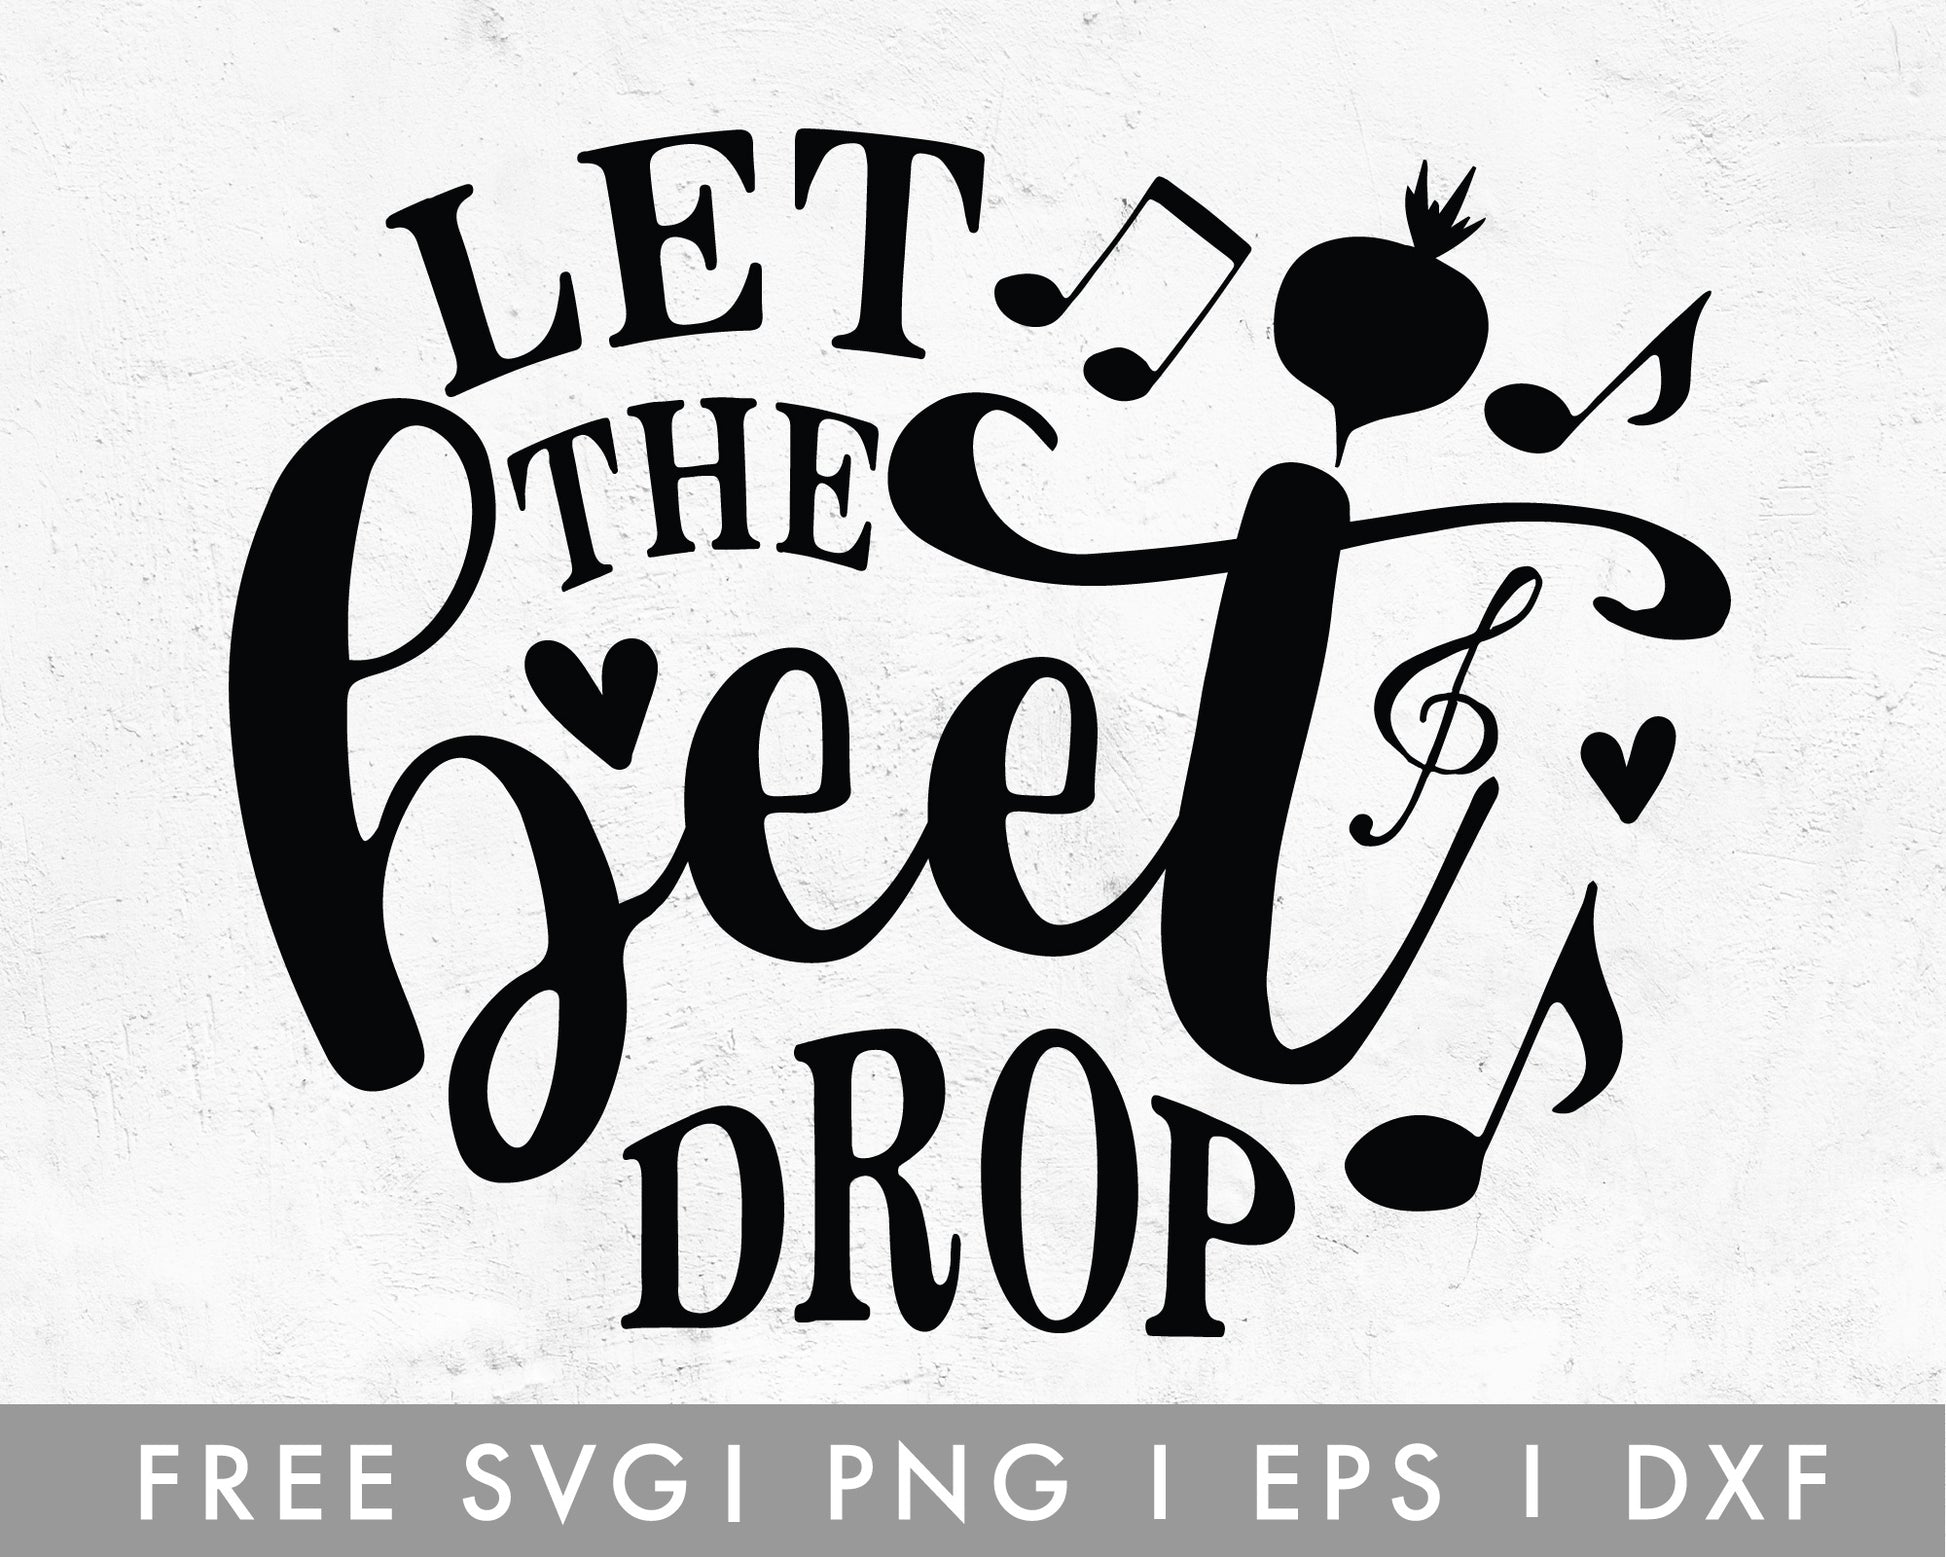 FREE Let The Beet Drop SVG Cut File for Cricut, Cameo Silhouette | Free SVG Cut File